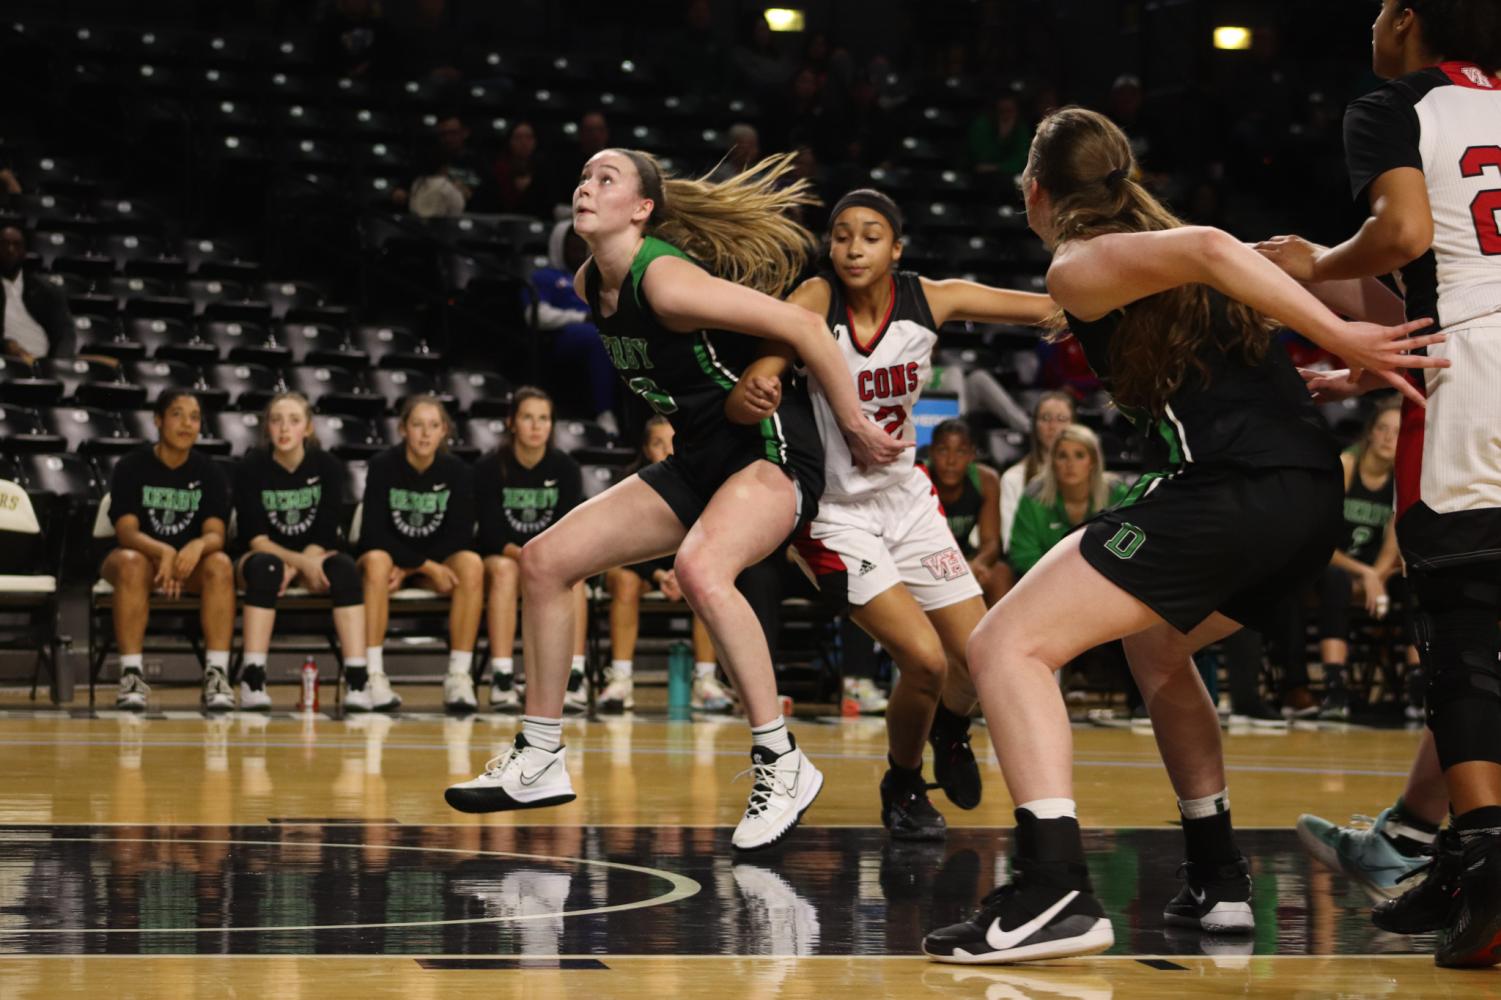 Girls+Varsity+Basketball+vs.+Heights+AVCTL+vs.+GWAL+%28Photos+by+Reese+Cowden%29